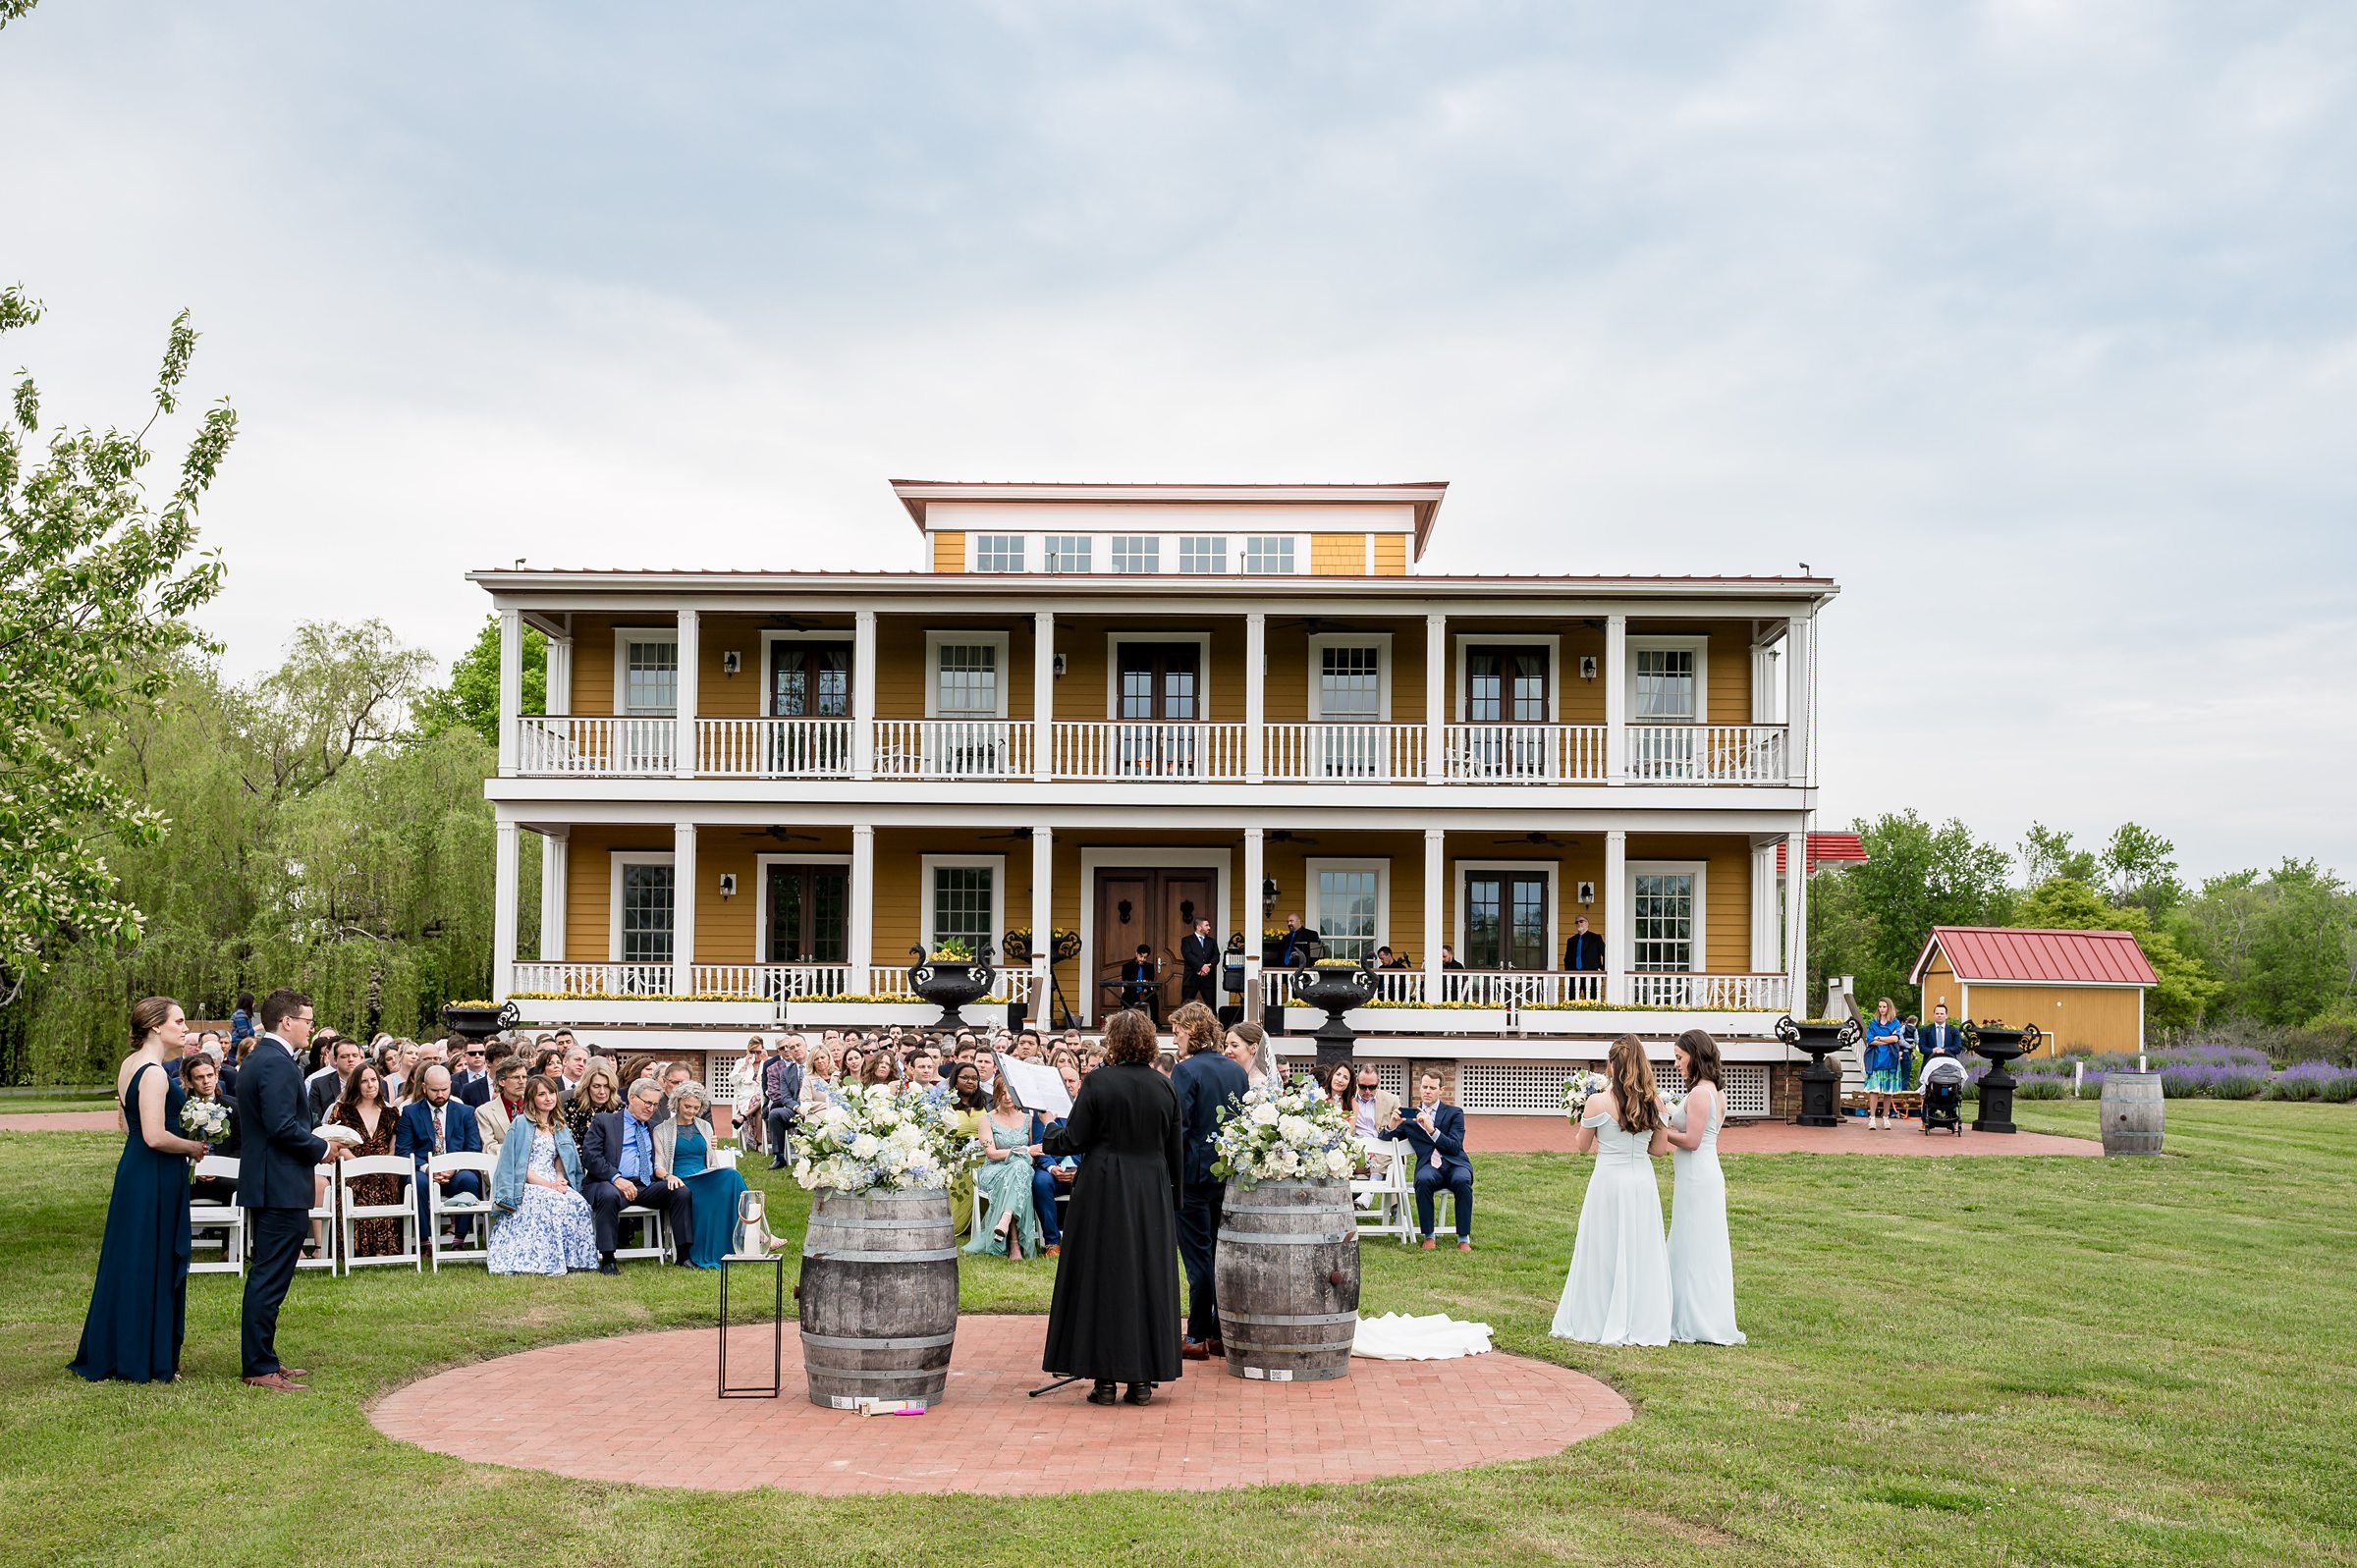 A wedding ceremony takes place outdoors in front of a large, two-story building with a yellow exterior and white railings. Guests are seated on white chairs, and the couple stands with an officiant.